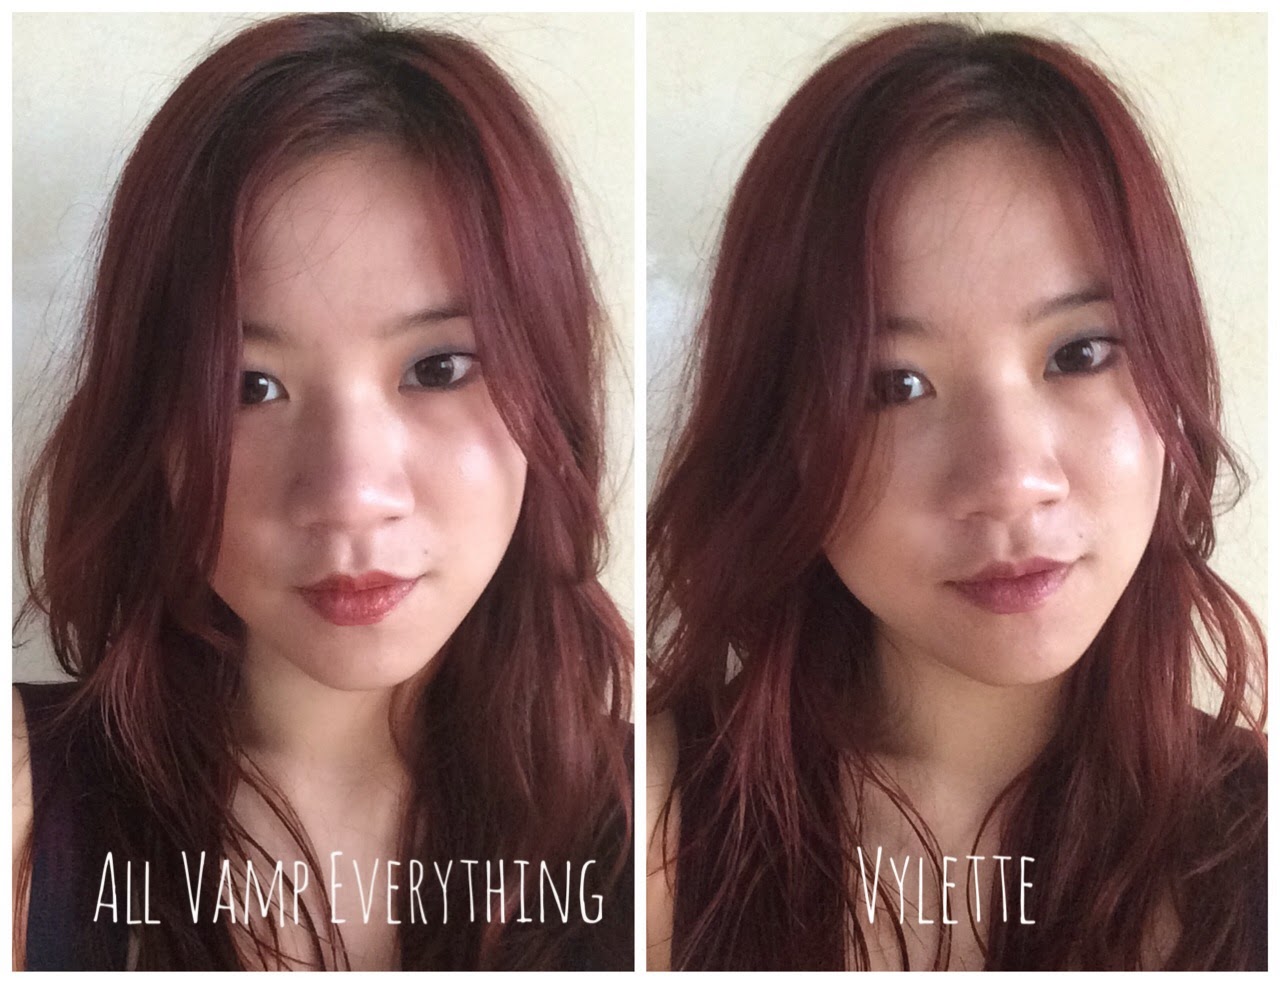 swatches vylette all vamp everything grape kool aid